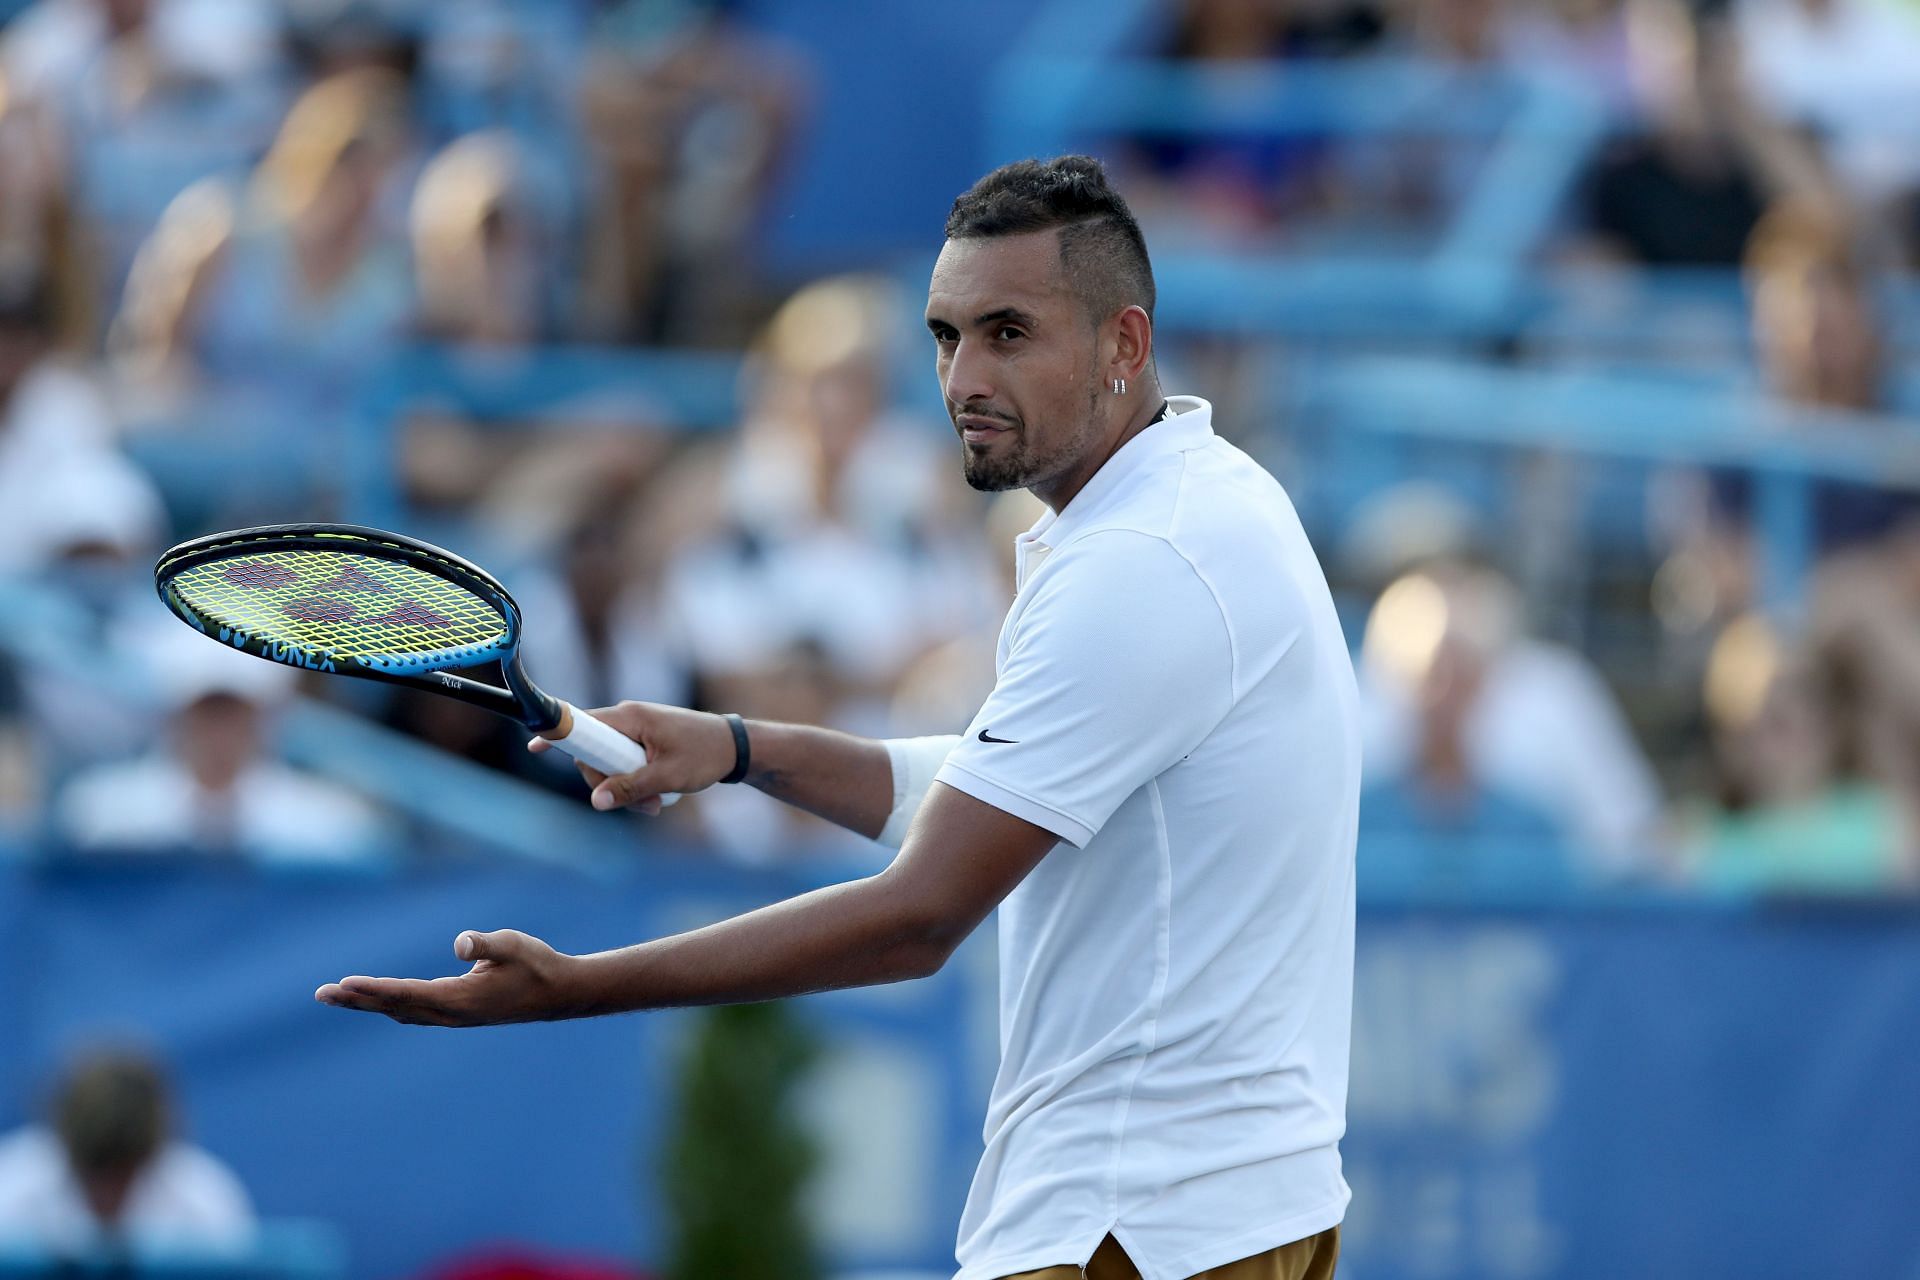 Daniil Medvedev expected his second-round match against Nick Kyrgios to be a good contest